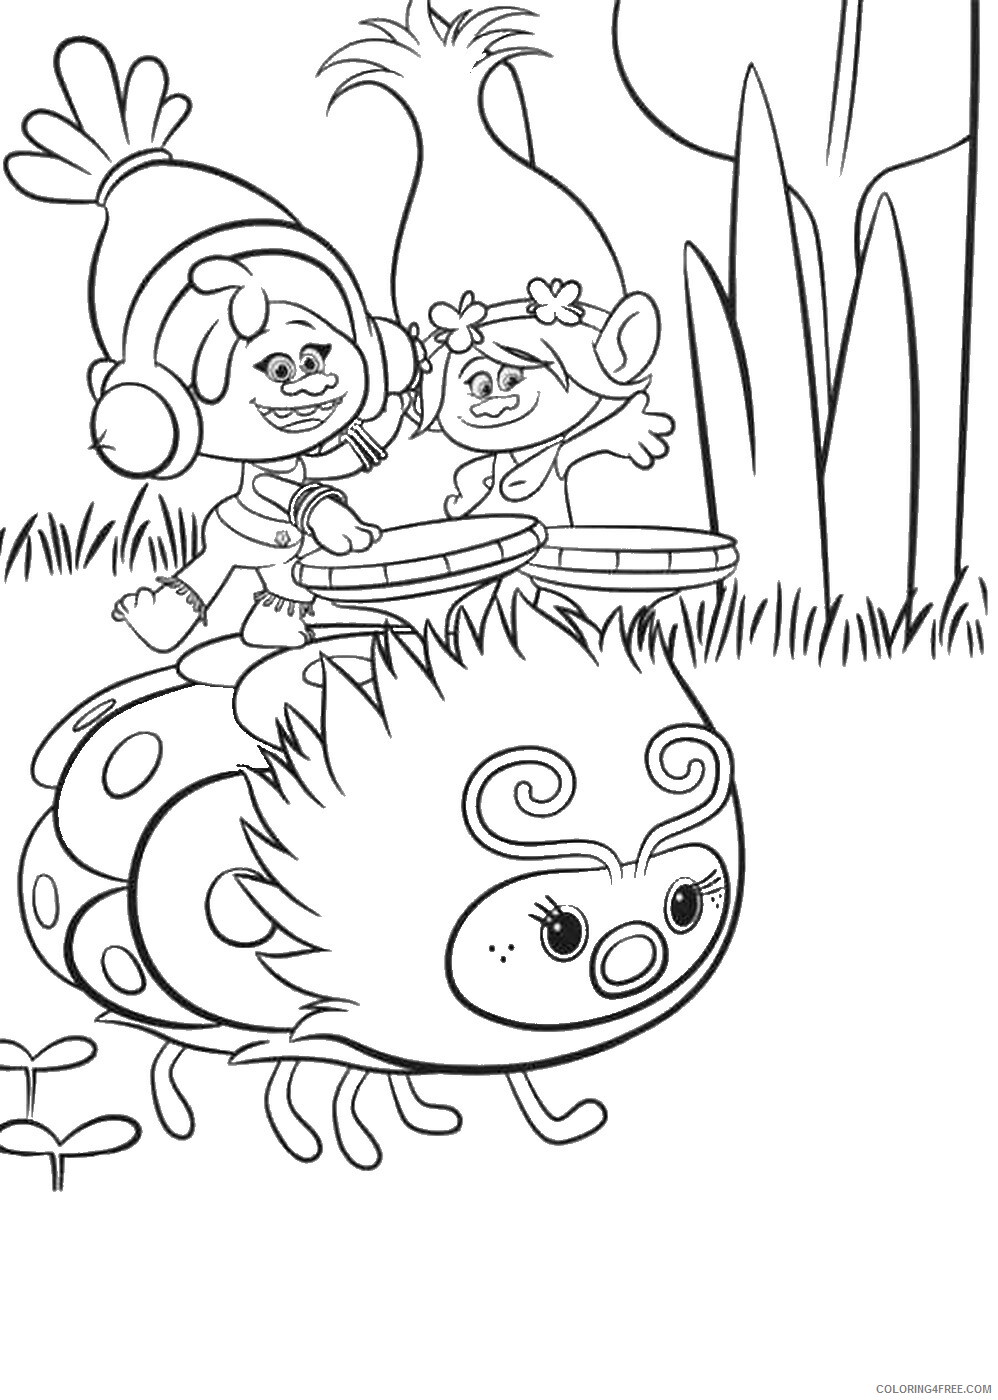 Trolls Coloring Pages TV Film trolls6 Printable 2020 10829 Coloring4free